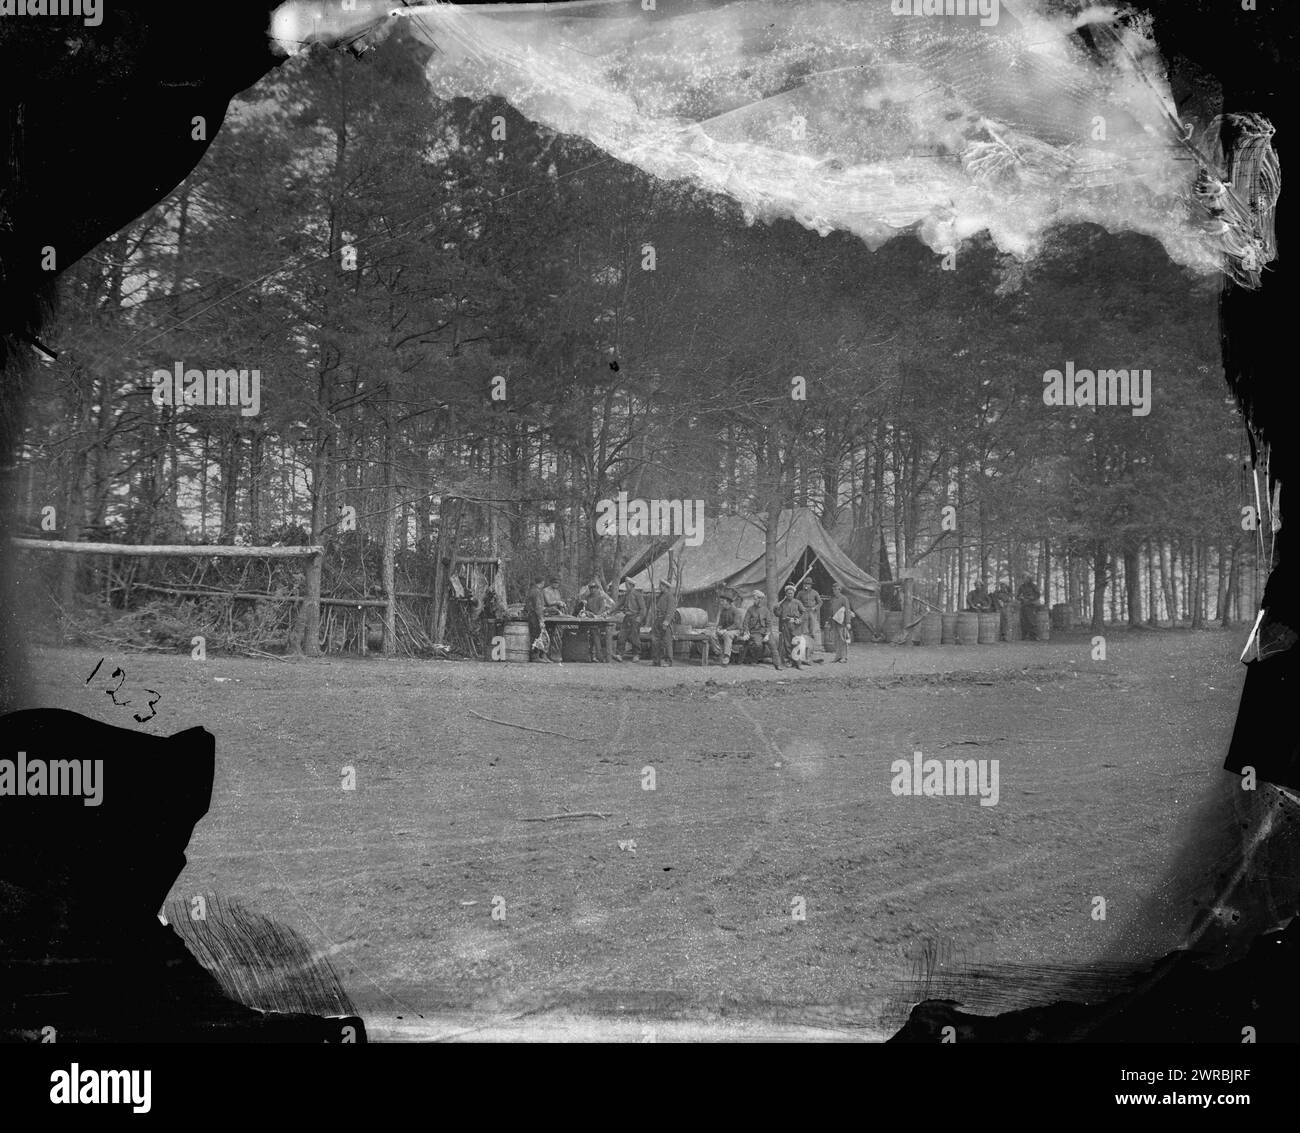 Brandy Station, Va. Commissary department, Army of the Potomac headquarters, Photograph from the main eastern theater of war, winter quarters at Brandy Station, December 1863-April 1864., O'Sullivan, Timothy H., 1840-1882, photographer, 1864 April., United States, History, Civil War, 1861-1865, Stereographs, 1860-1870., Stereographs, 1860-1870, Wet collodion negatives, 1 negative (2 plates): glass, stereograph, wet collodion Stock Photo